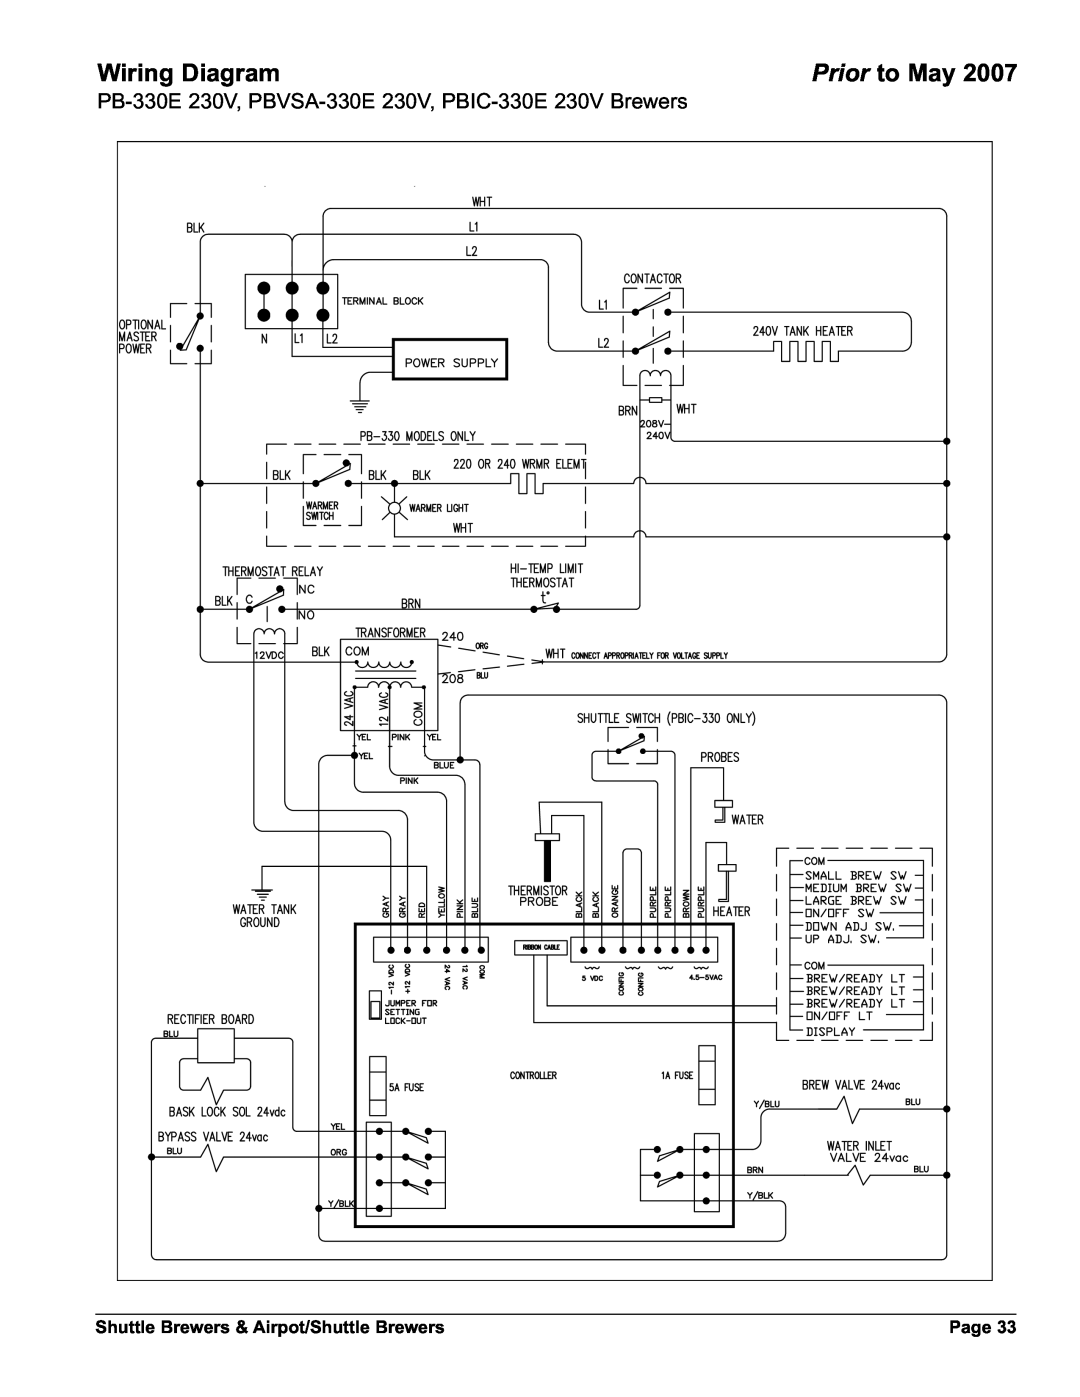 Grindmaster AM-344-04 instruction manual Wiring Diagram, Prior to May, Shuttle Brewers & Airpot/Shuttle Brewers, Page 